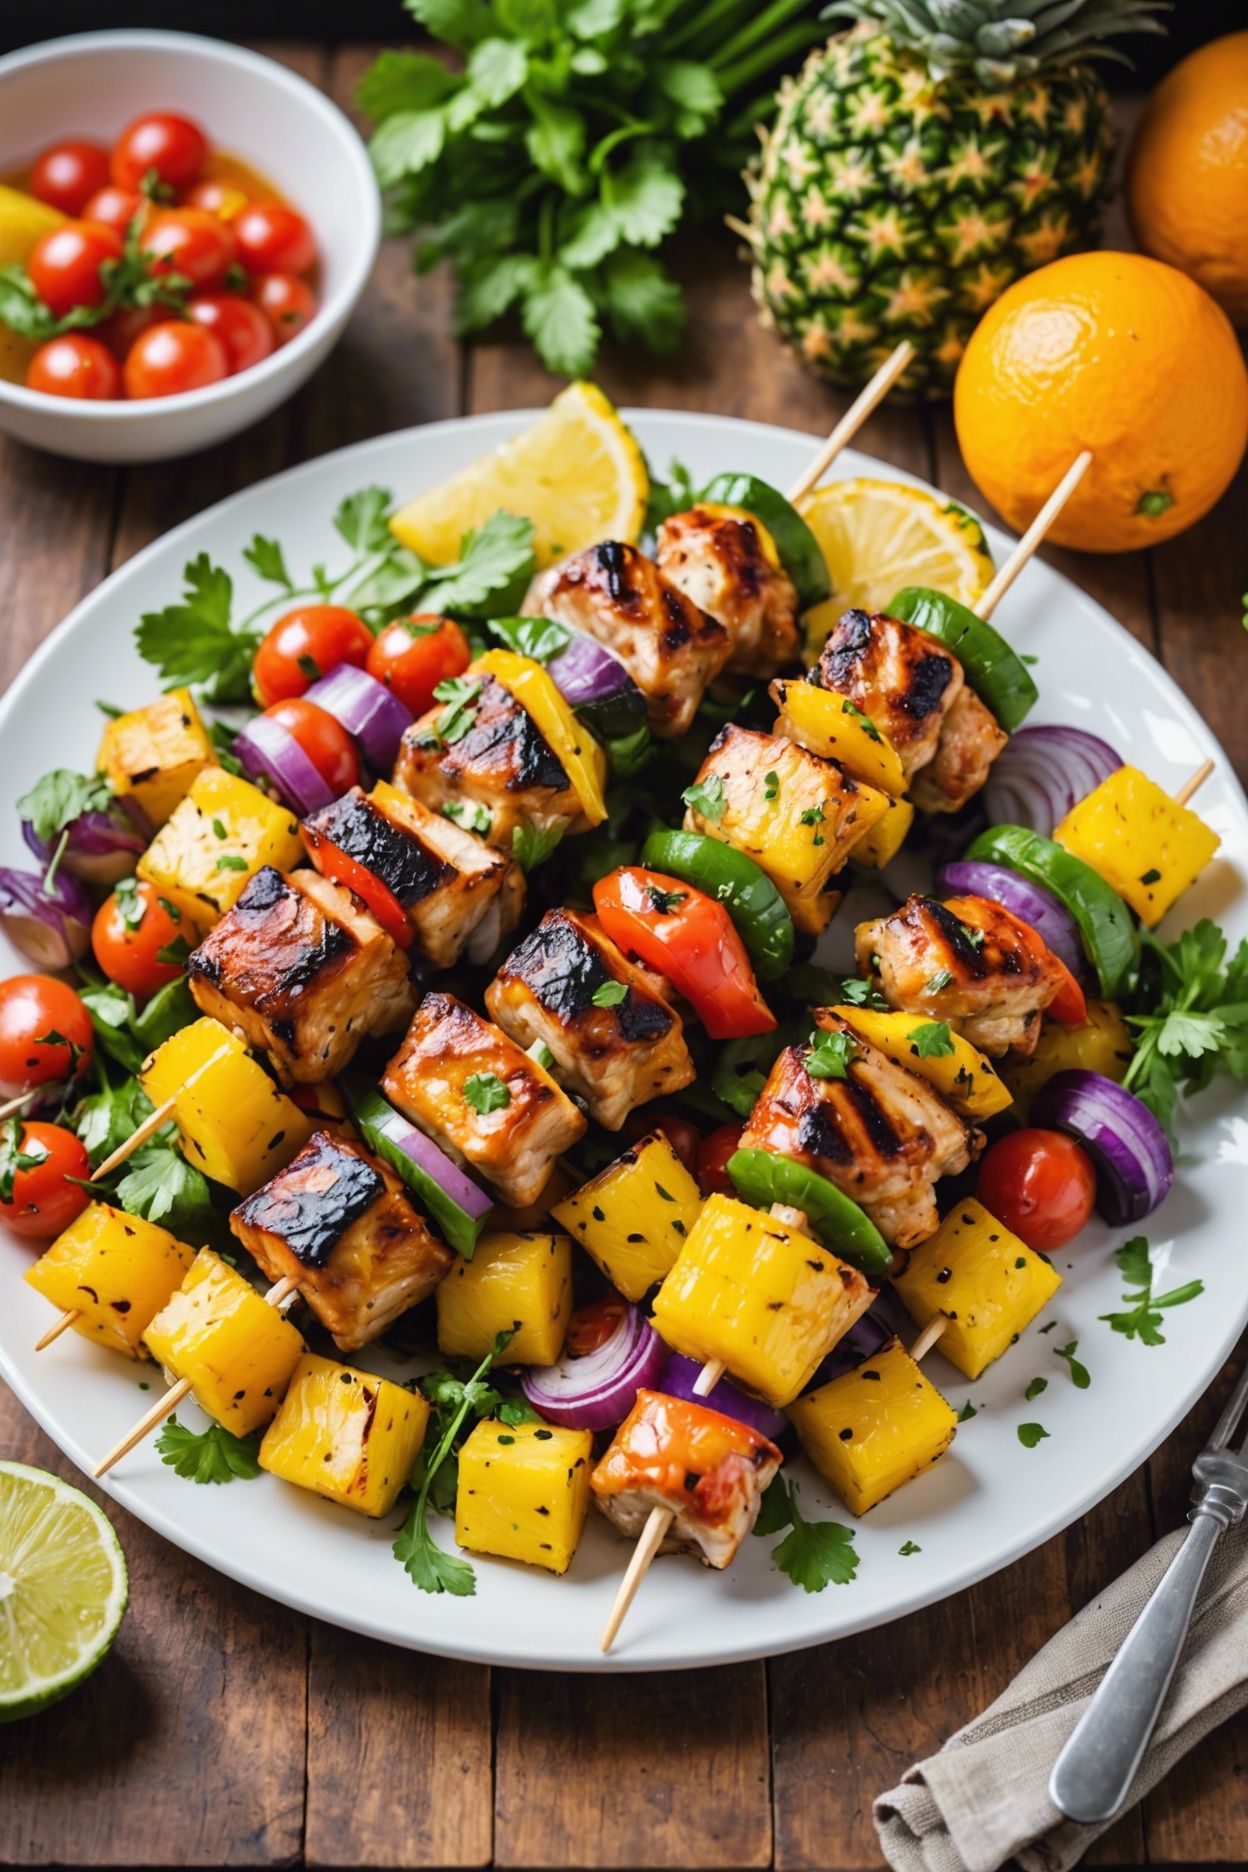 Grilled Orange Chicken Thigh Skewers With Pineapple And Vegetables